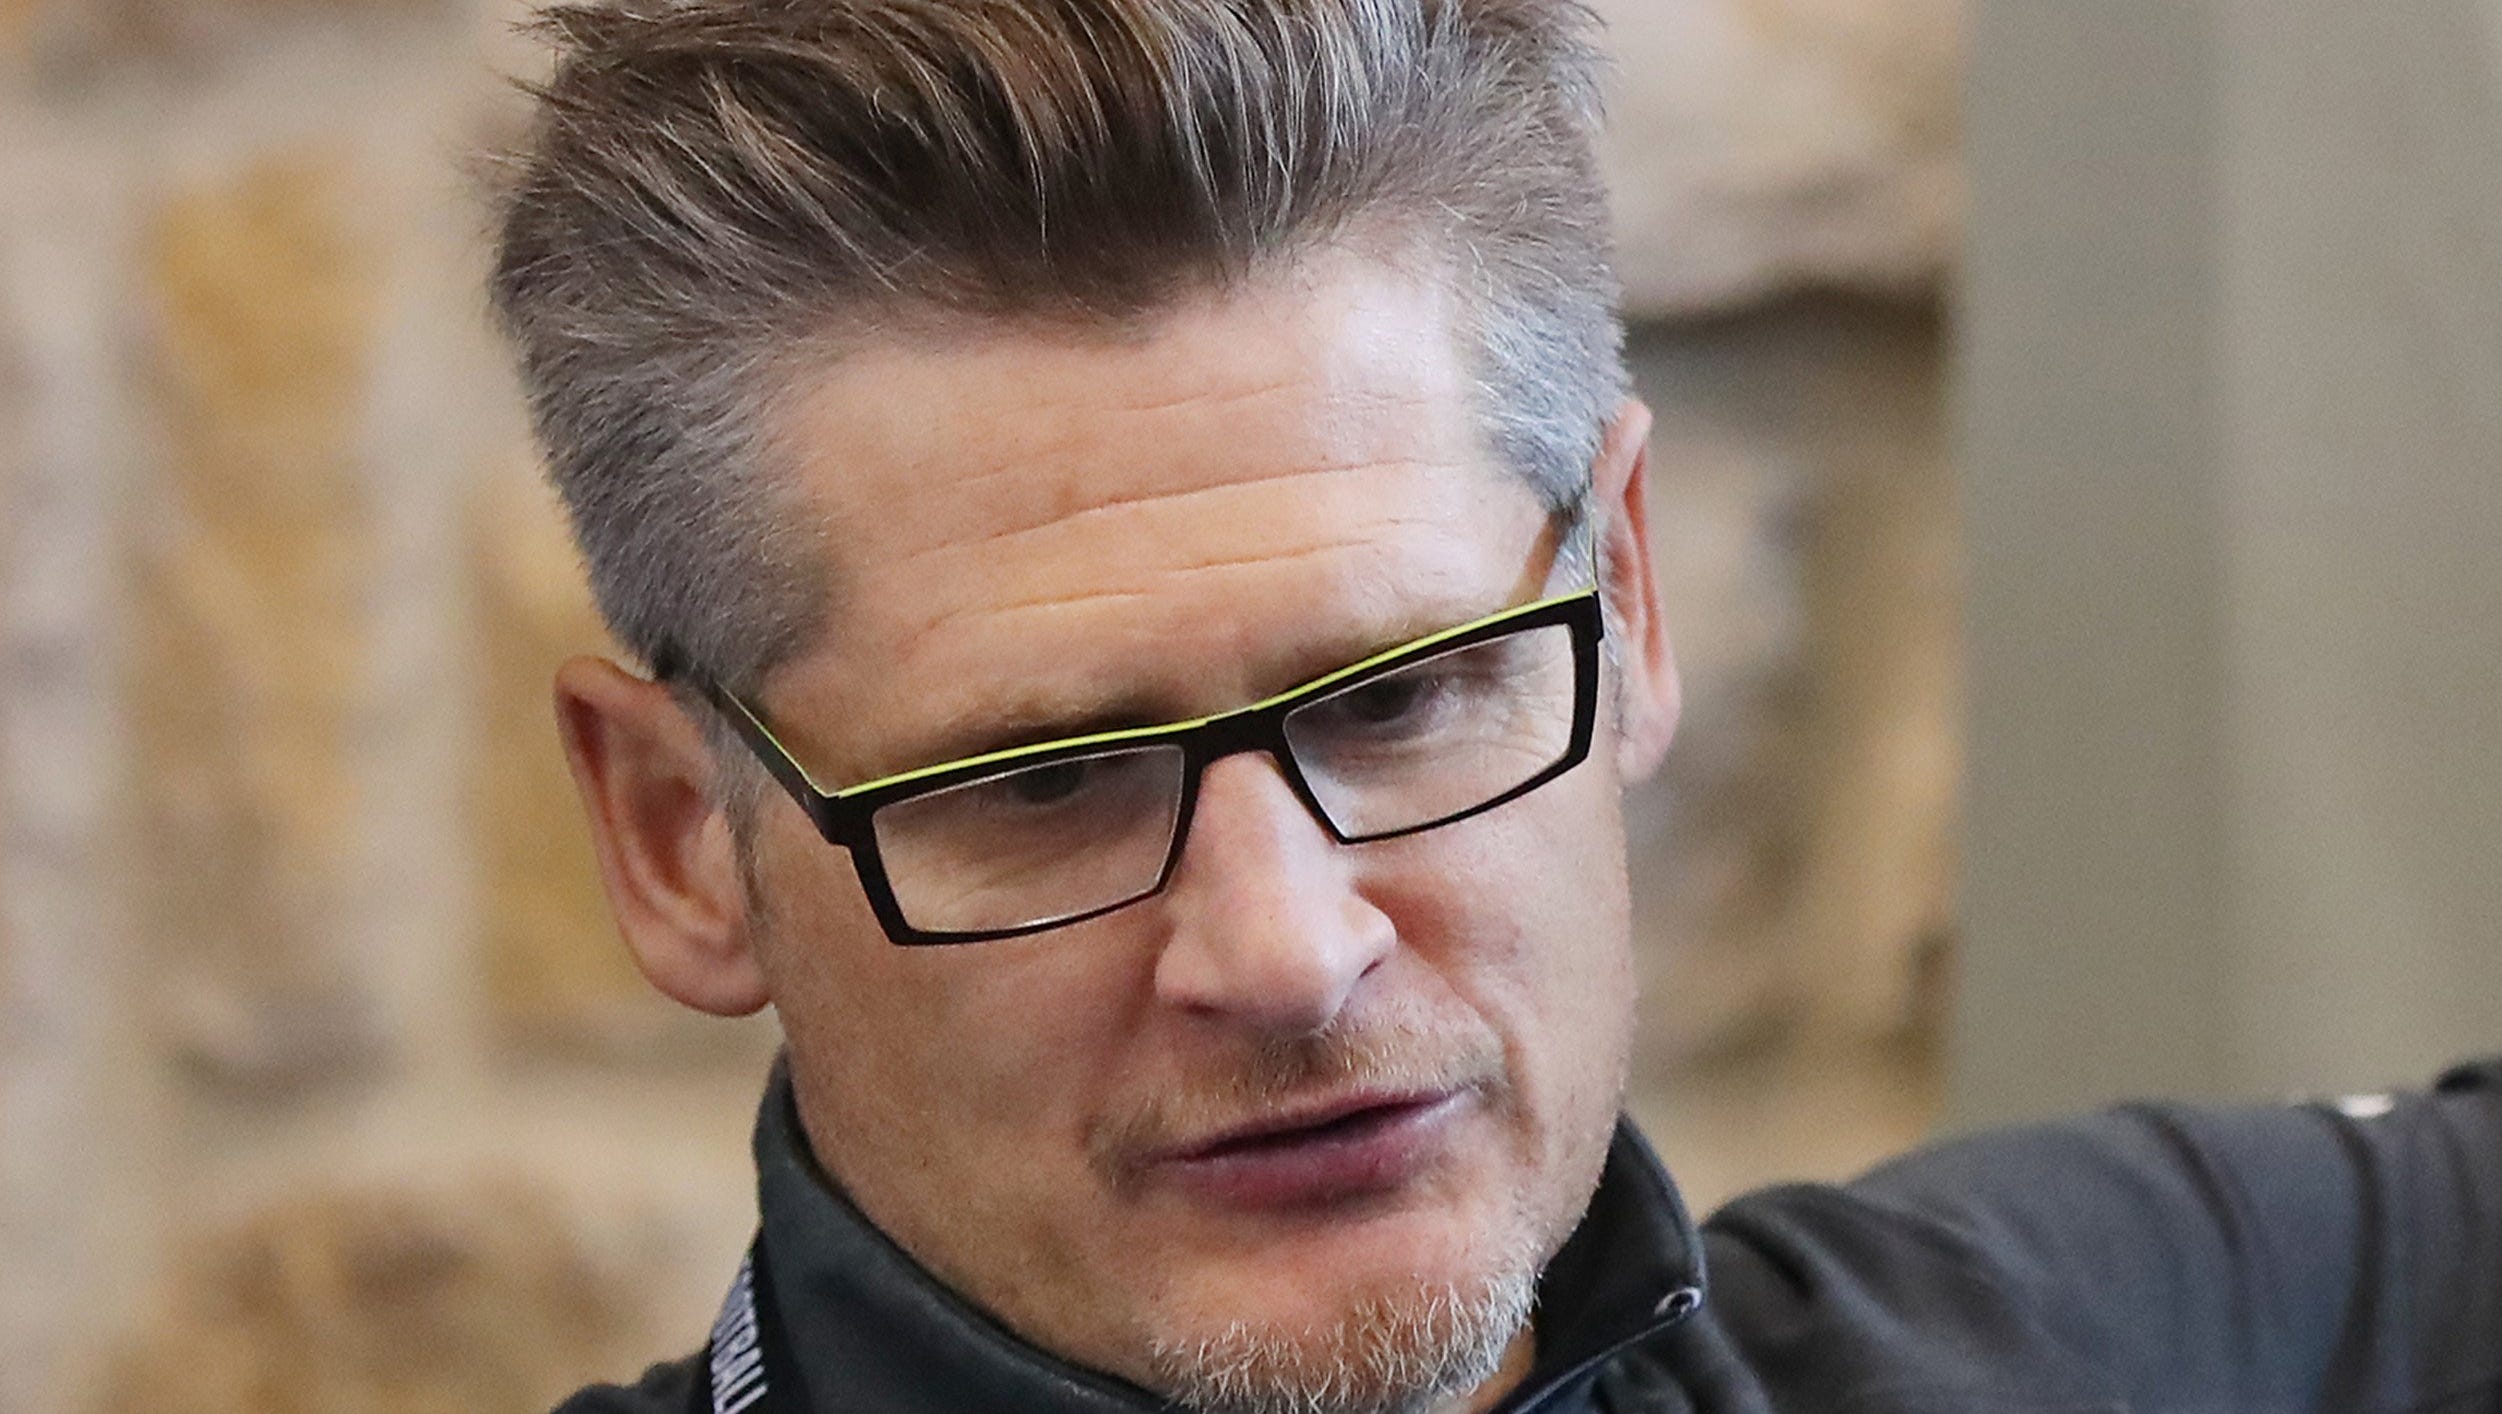 Atlanta Falcons general manager Thomas Dimitroff speaks with a reporter during media availability Tuesday, Jan. 31, 2017 at Memorial City Mall ice arena in Houston, Texas.